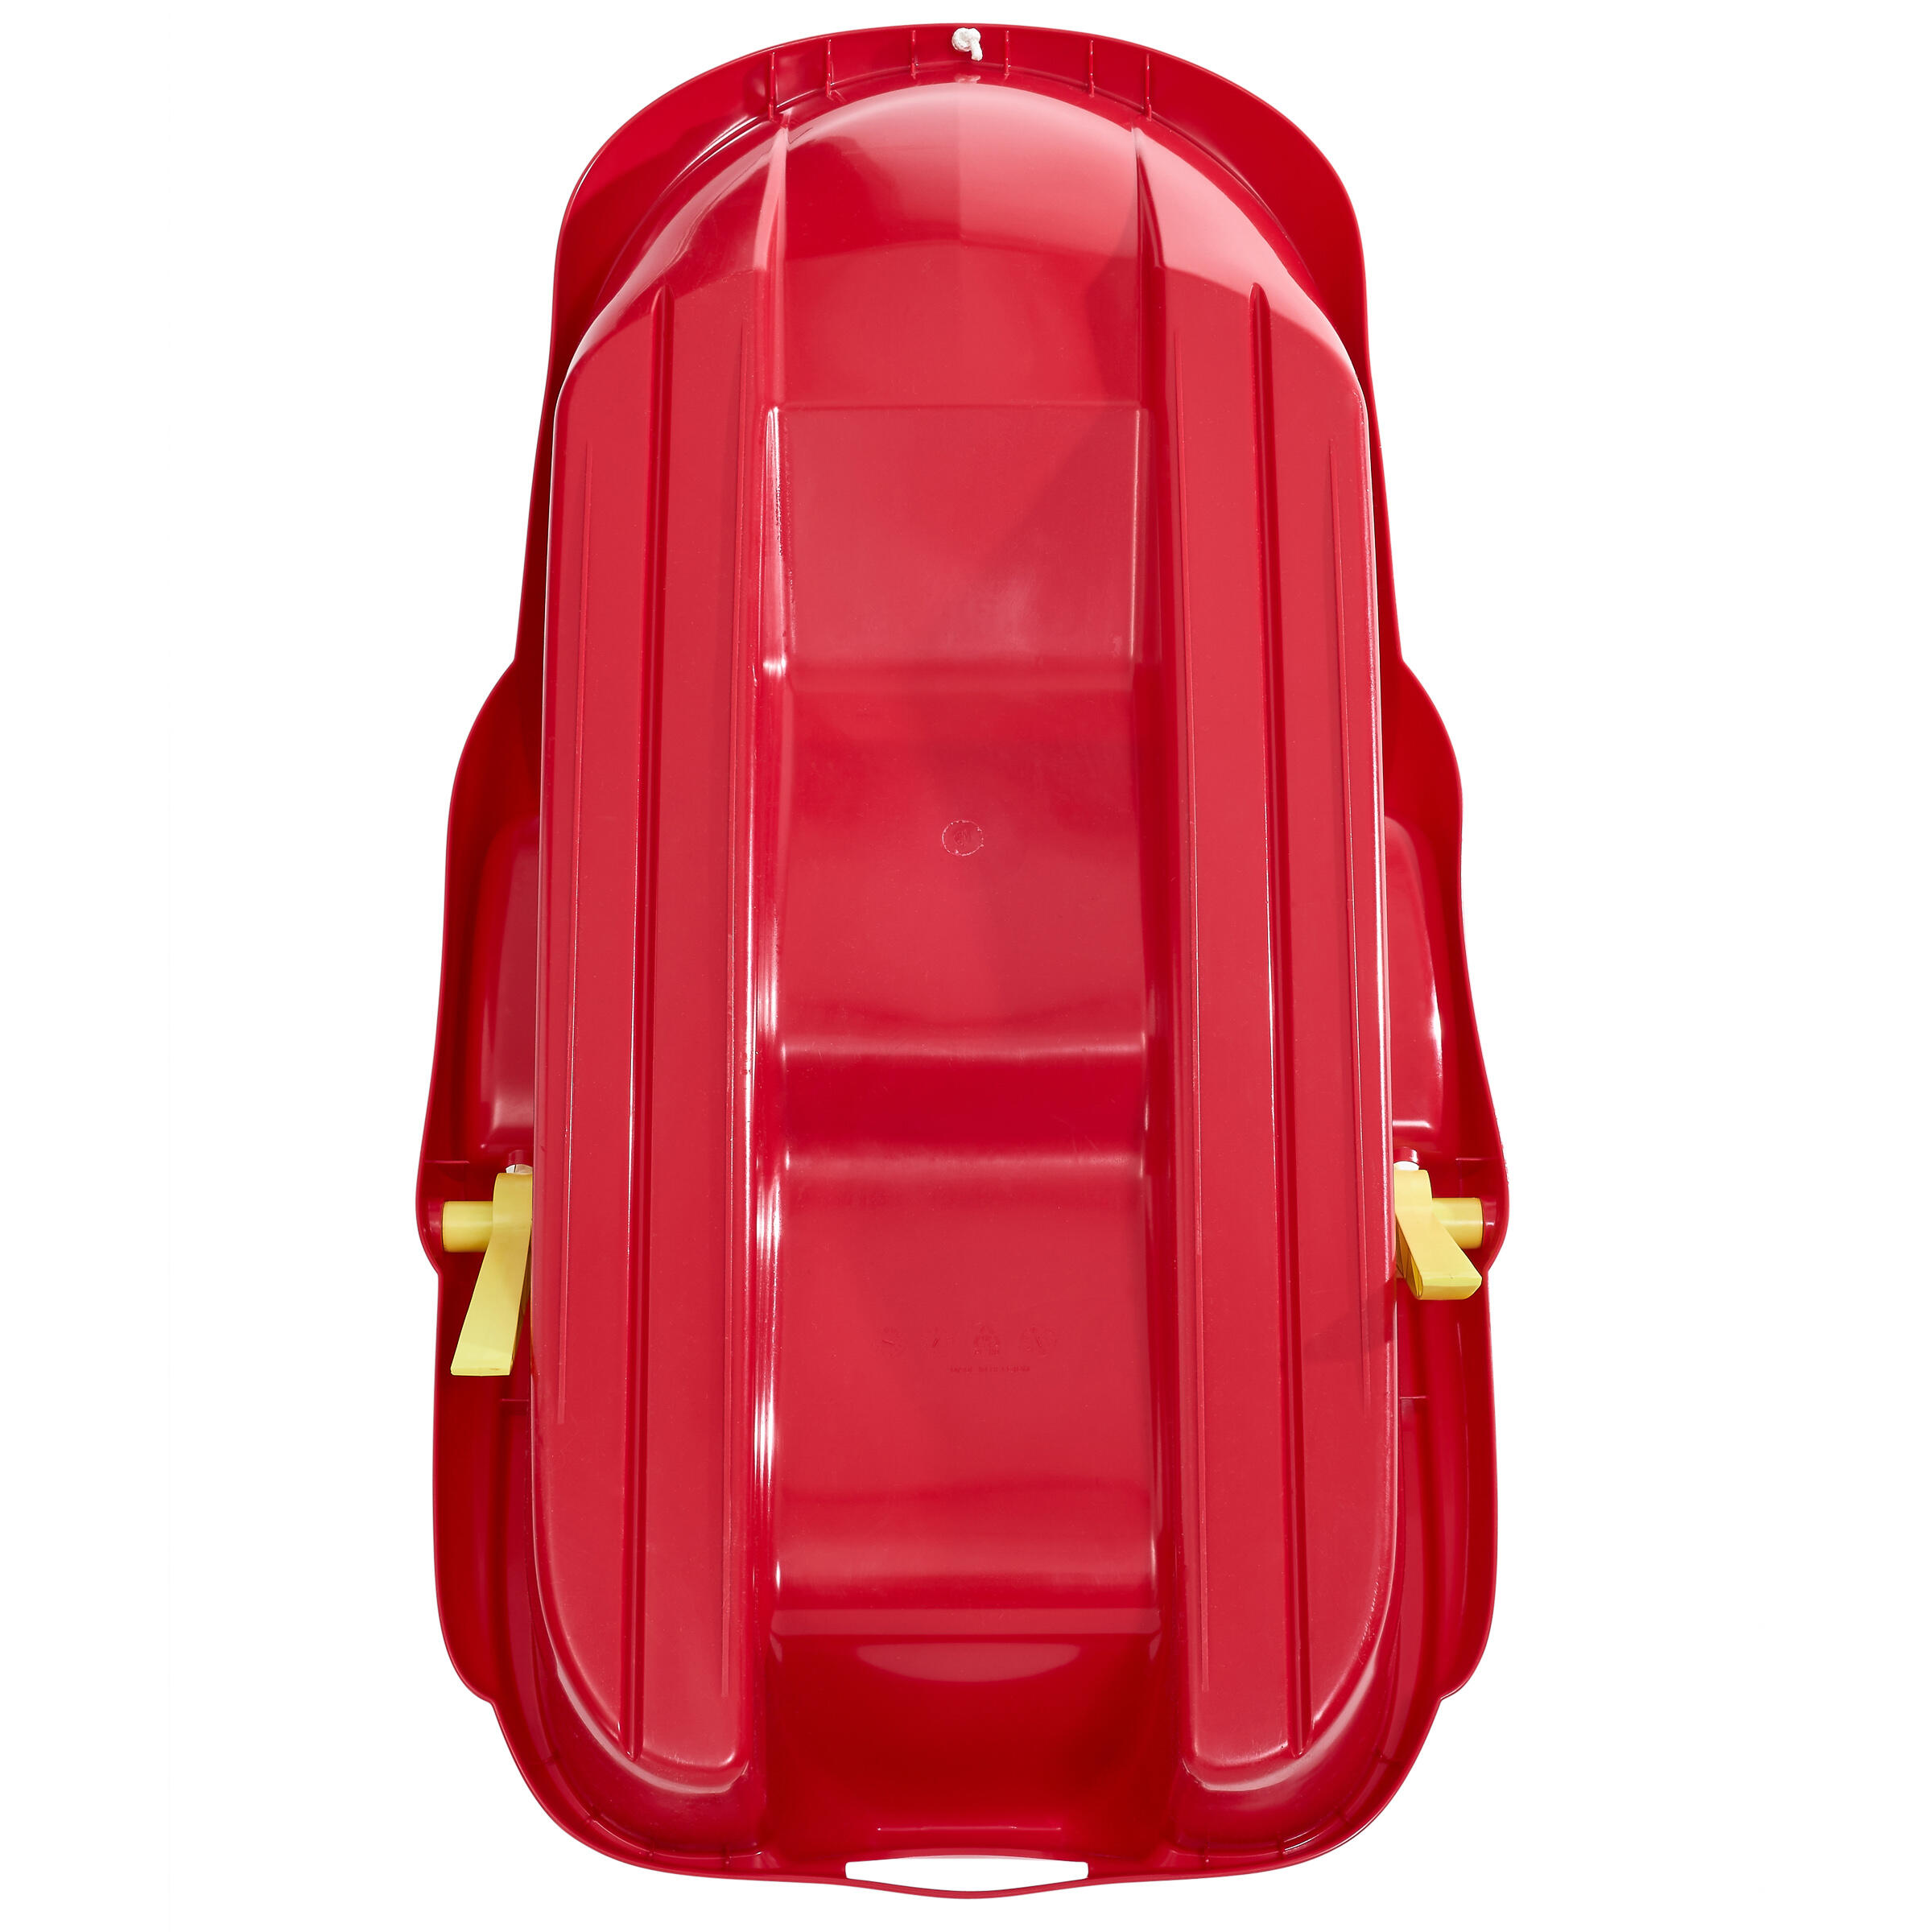 MRZ 100 2-Person Sledge With Brake - Red 6/8